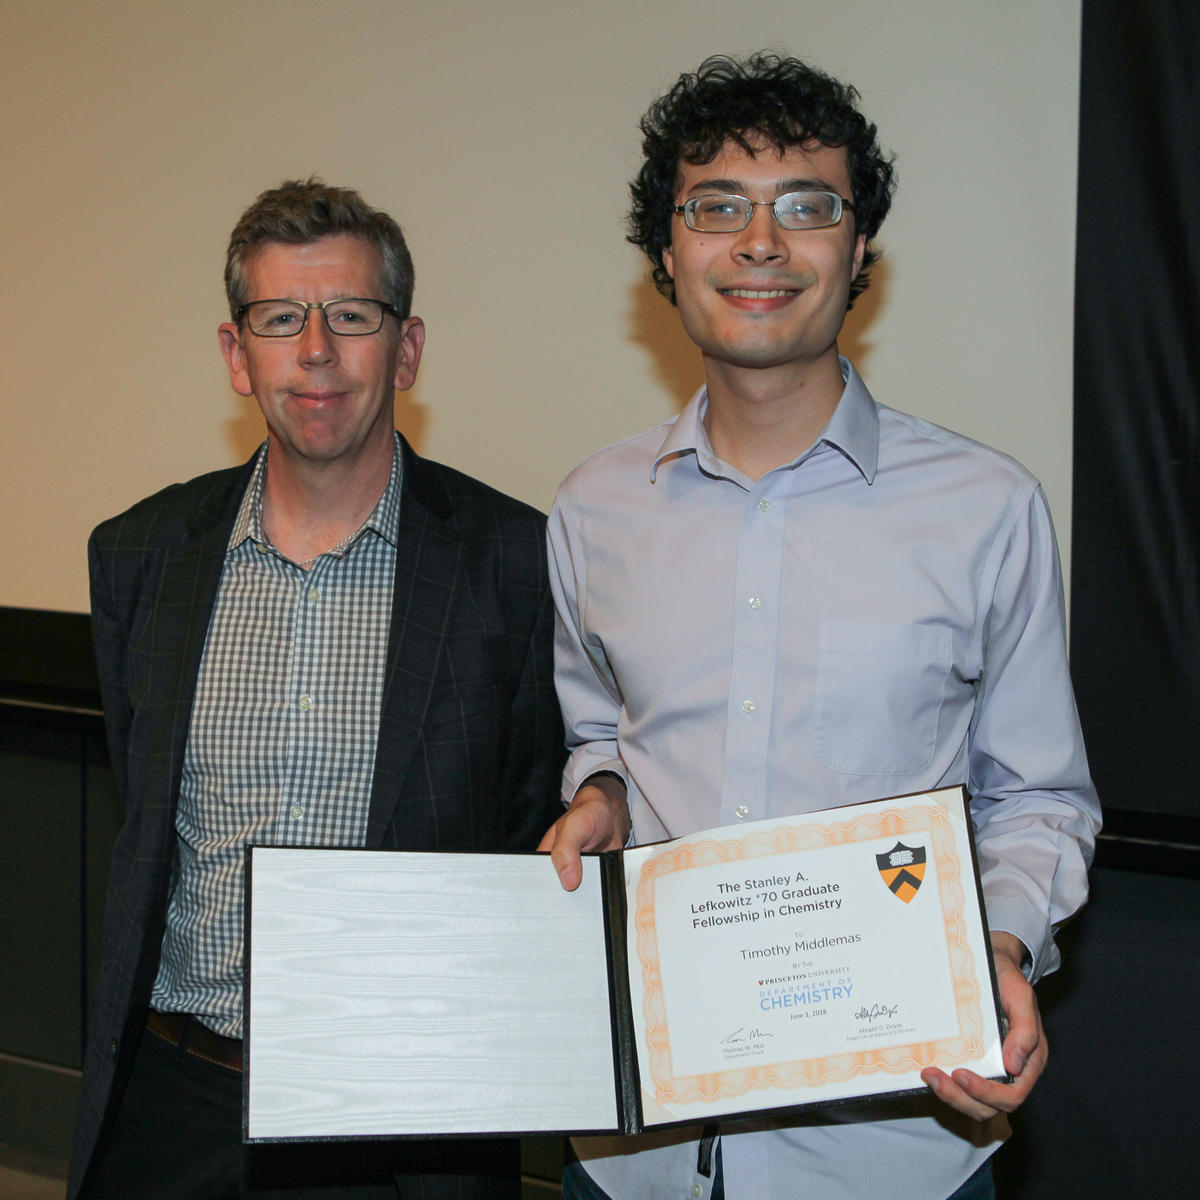 Tom Muir and Timothy Middlemas (Torquato lab), recipient of The Stanley A. Lefkowitz *70 Graduate Fellowship in Chemistry